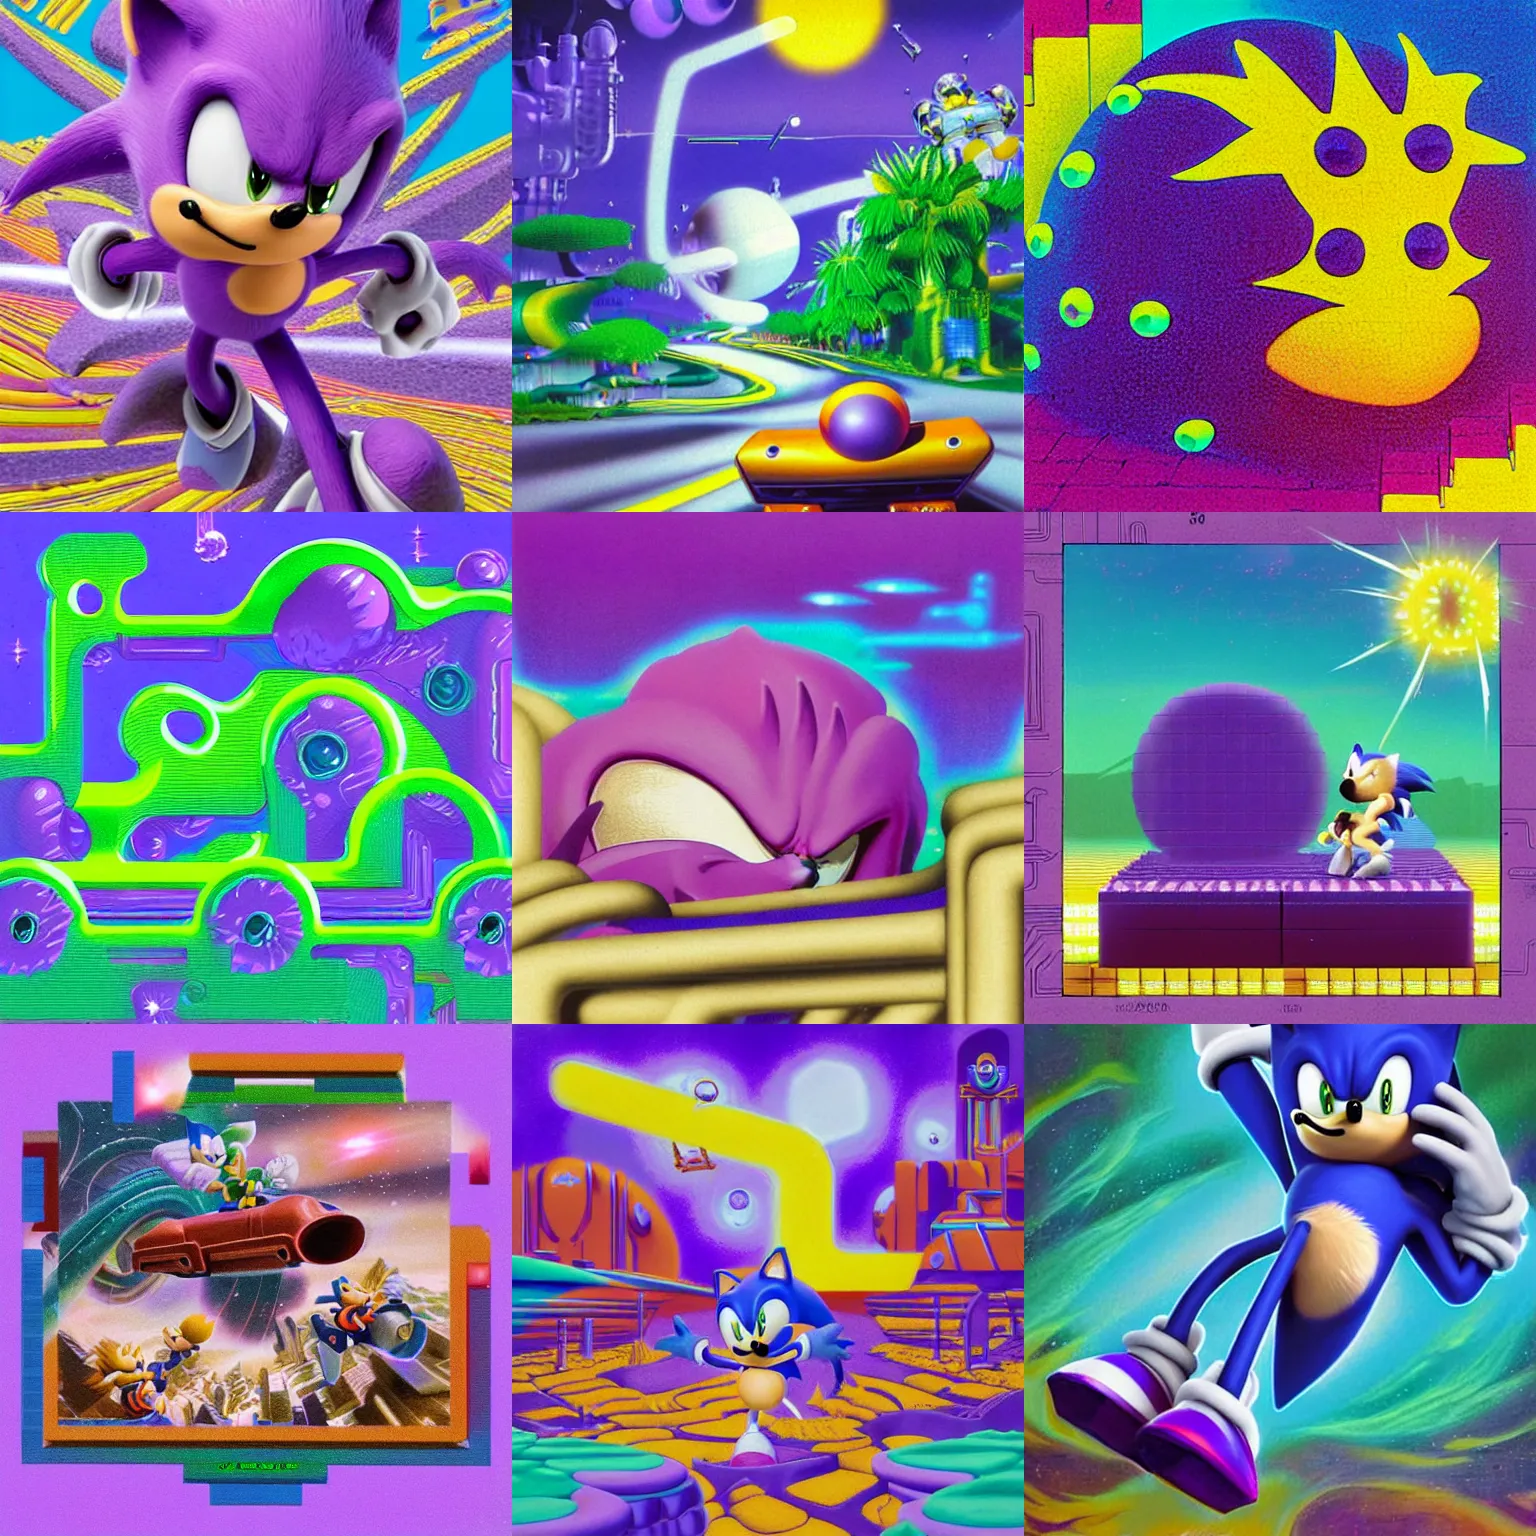 Prompt: dreaming of sonic hedgehog portrait deconstructivist claymation scifi matte painting totally radical landscape of a surreal stars, retro moulded professional soft pastels high quality airbrush art album cover of a liquid dissolving airbrush art lsd sonic the hedgehog swimming through cyberspace purple teal checkerboard background 1 9 8 0 s 1 9 8 2 sega genesis video game album cover